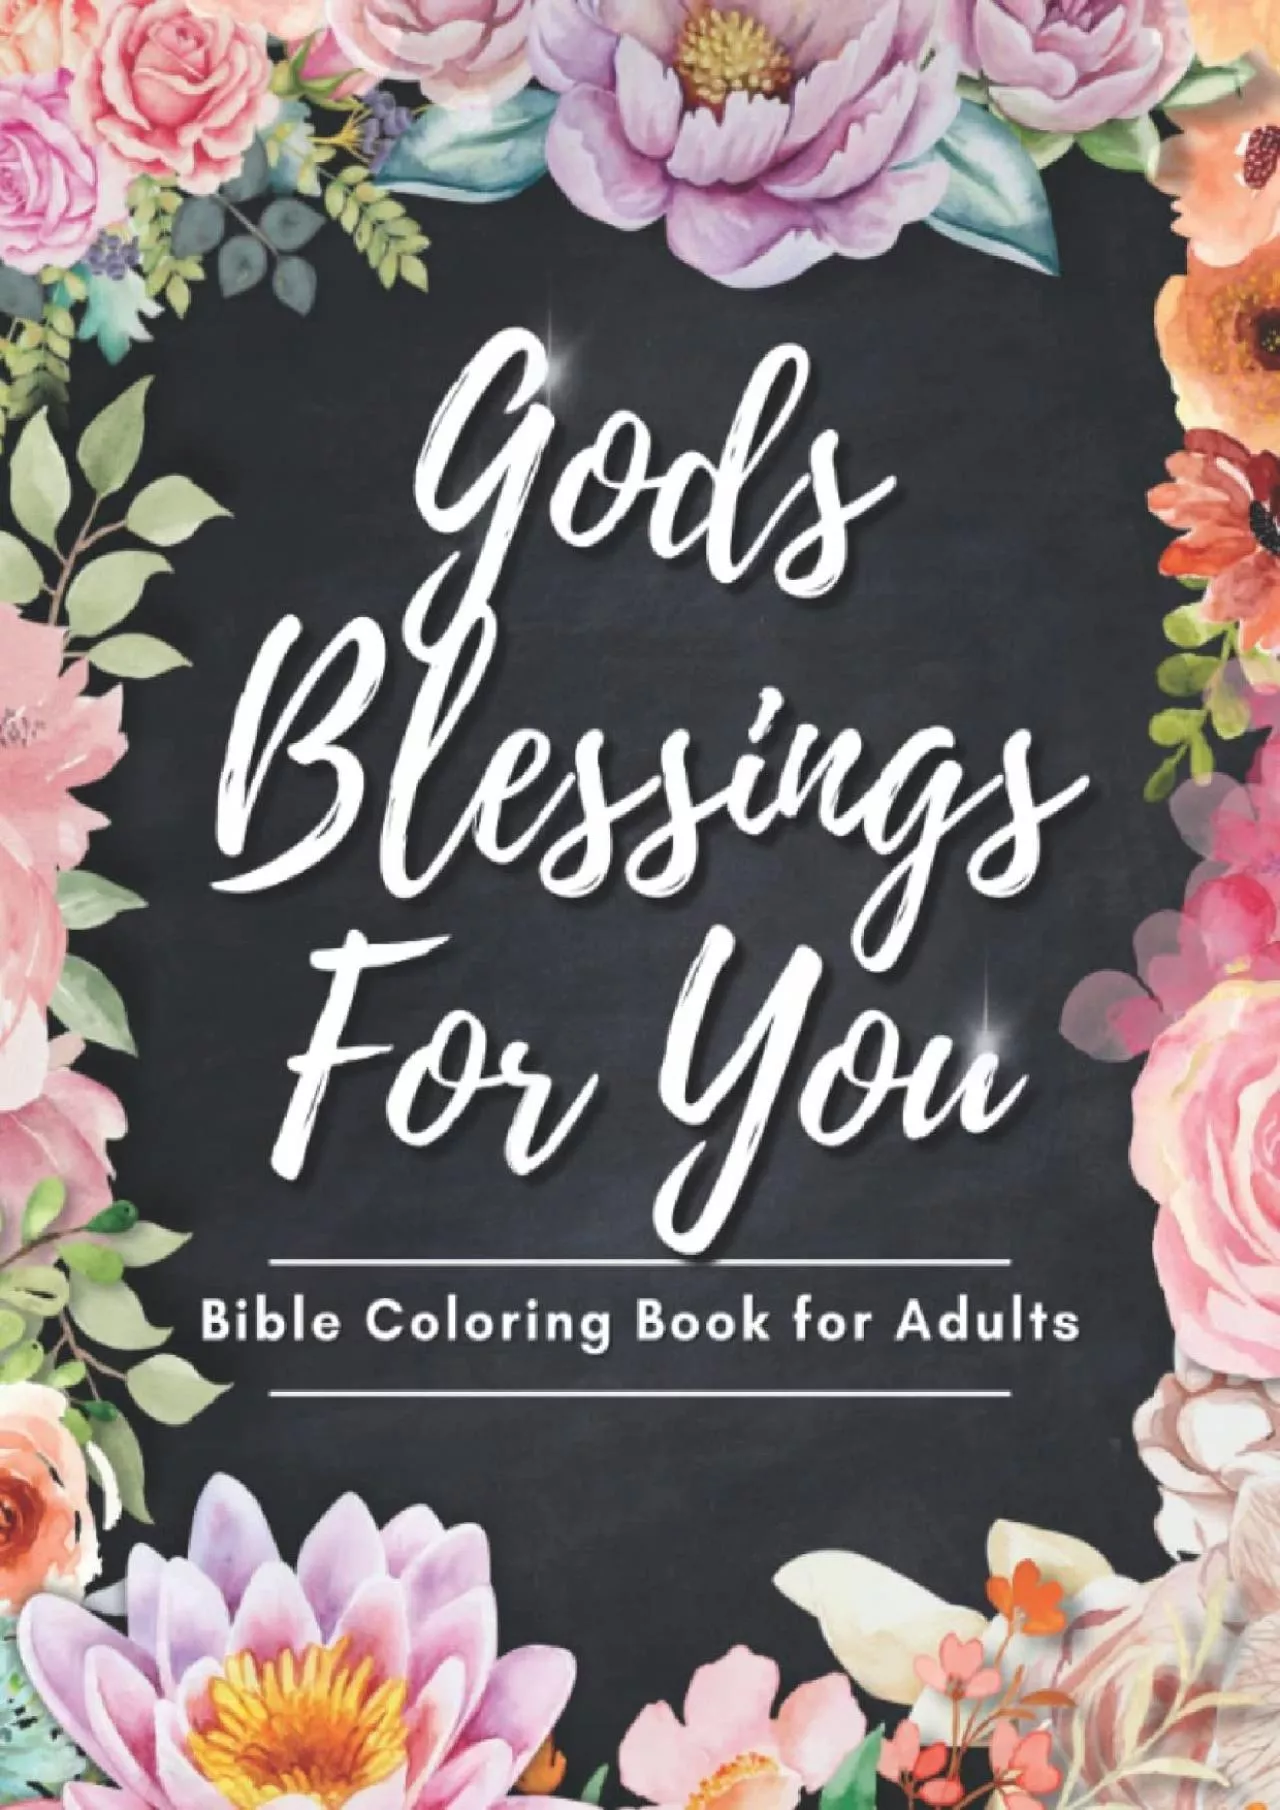 [eBOOK]-Bible Coloring Book For Adults: Gods Blessings for You, Bible Verse Coloring Book